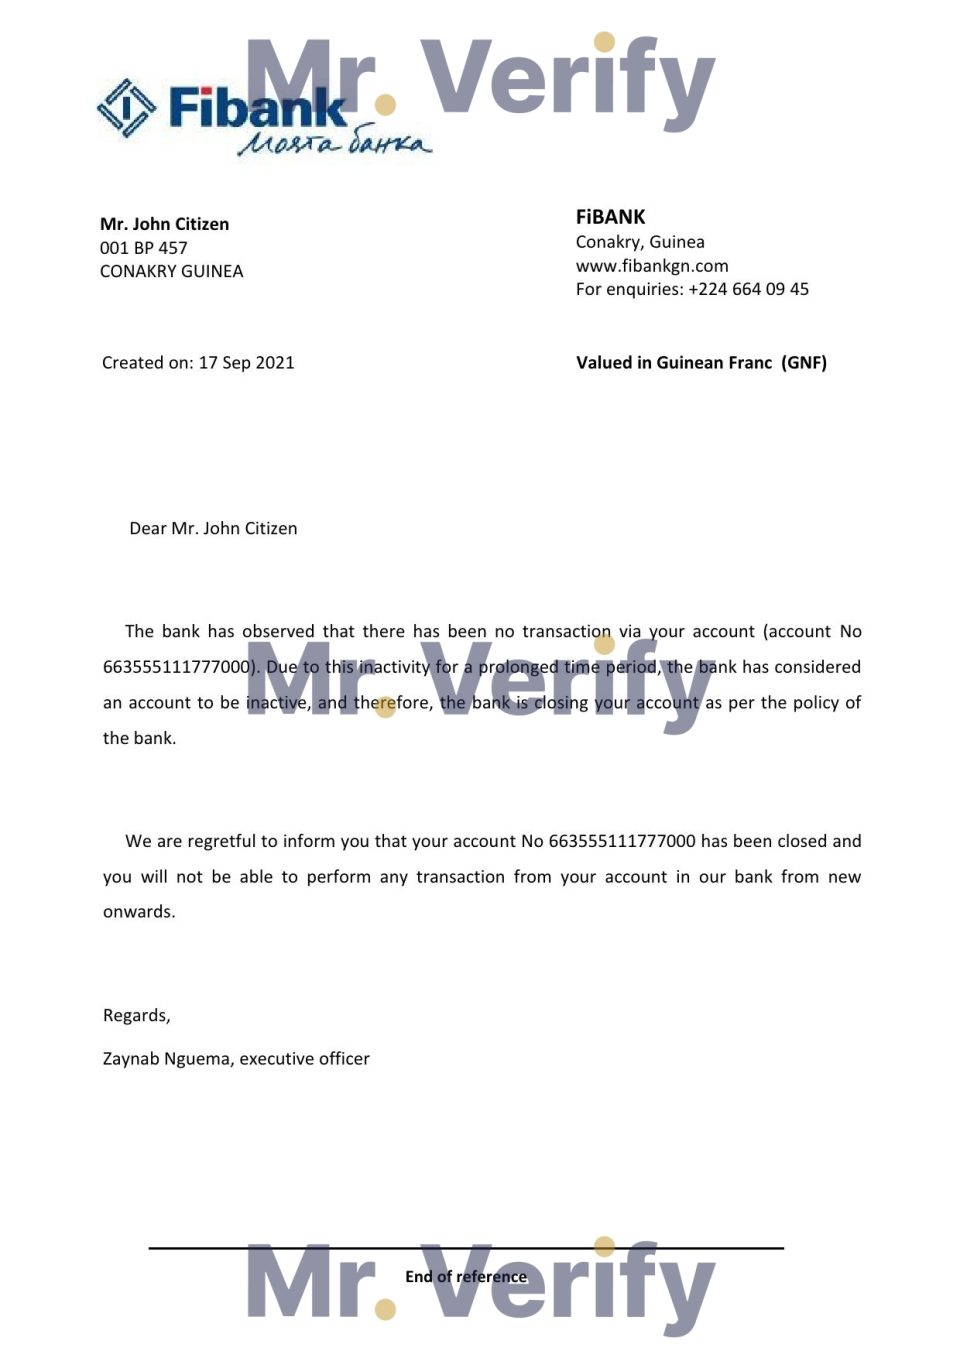 Download Guinea Fibank Bank Reference Letter Templates | Editable Word